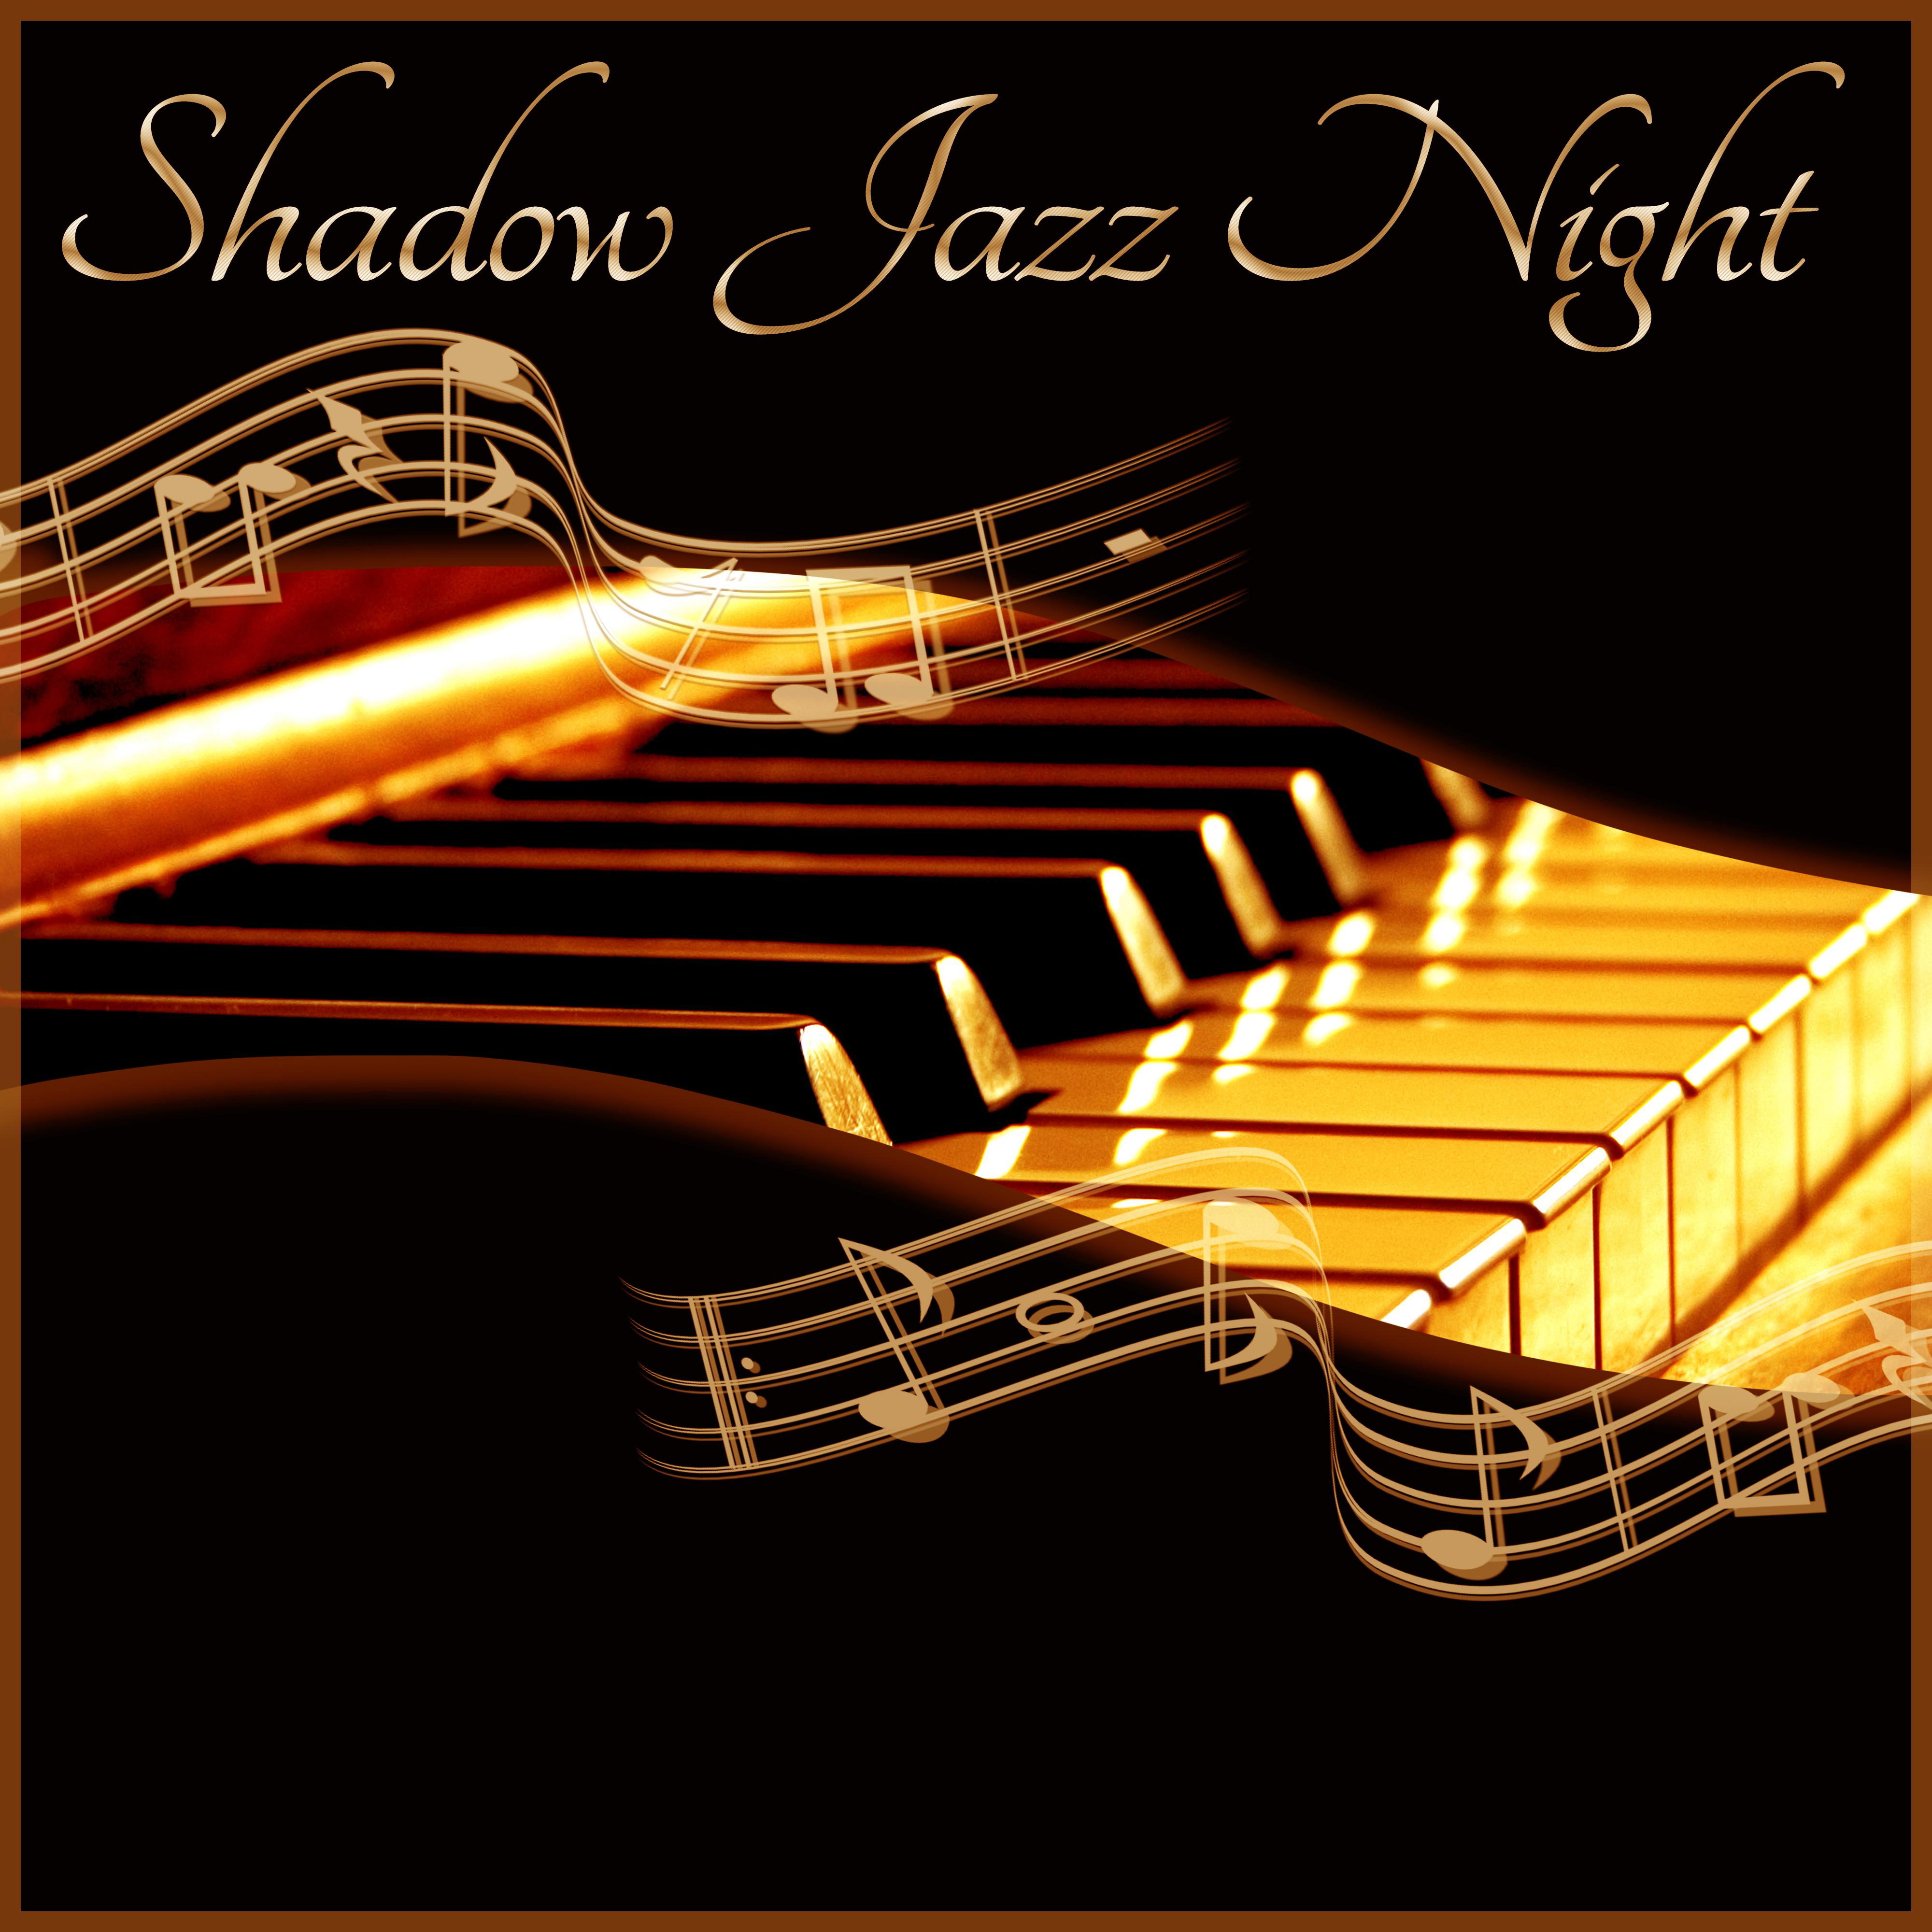 Shadow Jazz Night  Soothing Jazz Music, Quiet Piano Sounds, Mellow Jazz, Restaurant  Cafe Bar, Easy Listening